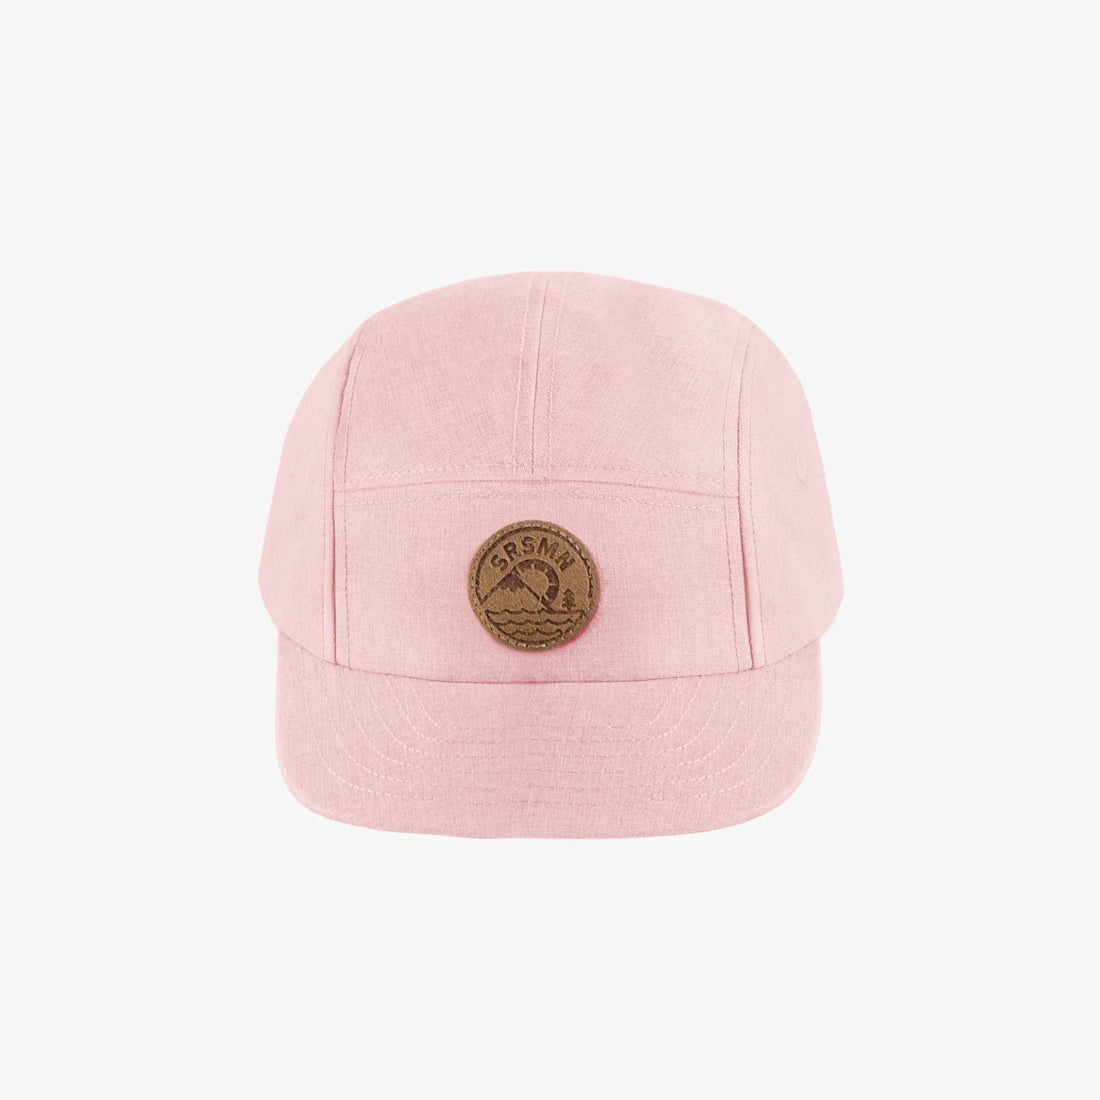 PINK CAP WITH FLAT VISOR IN LINEN AND COTTON, BABY